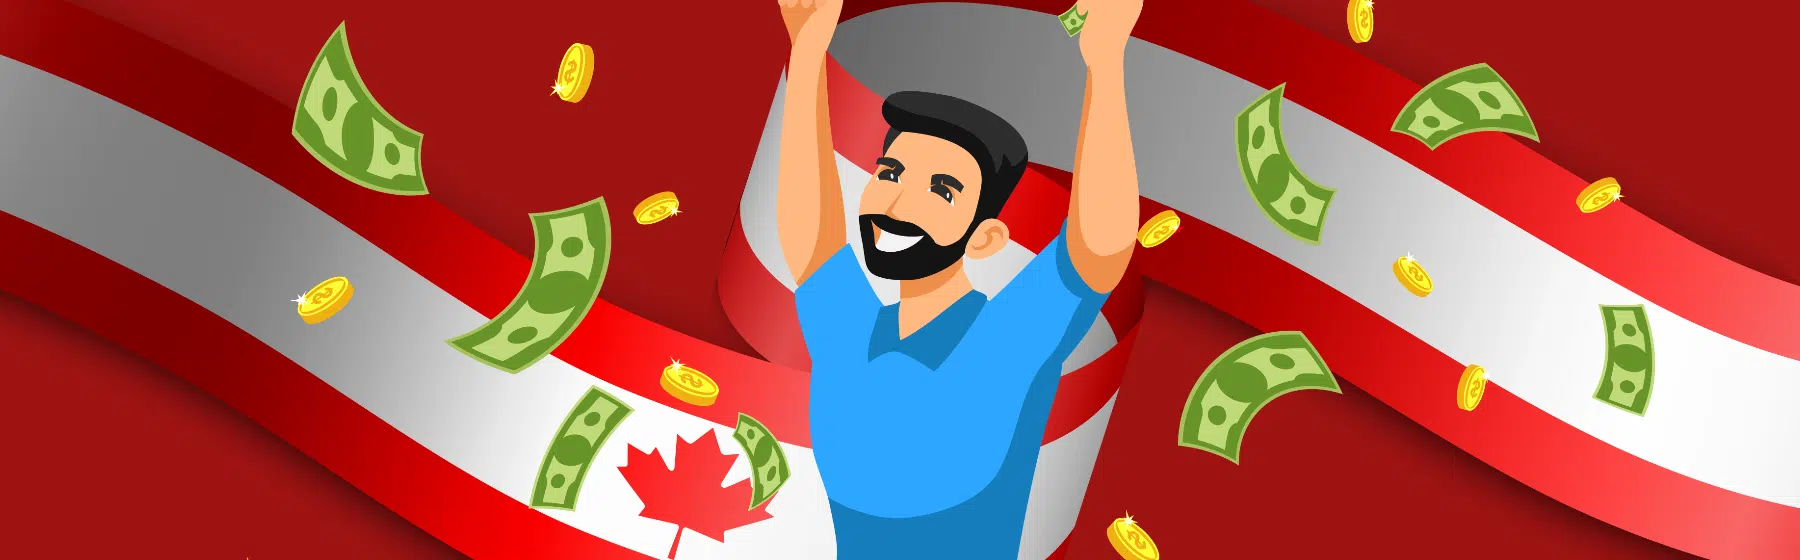 man with beard smiling in front canadian flag and cash